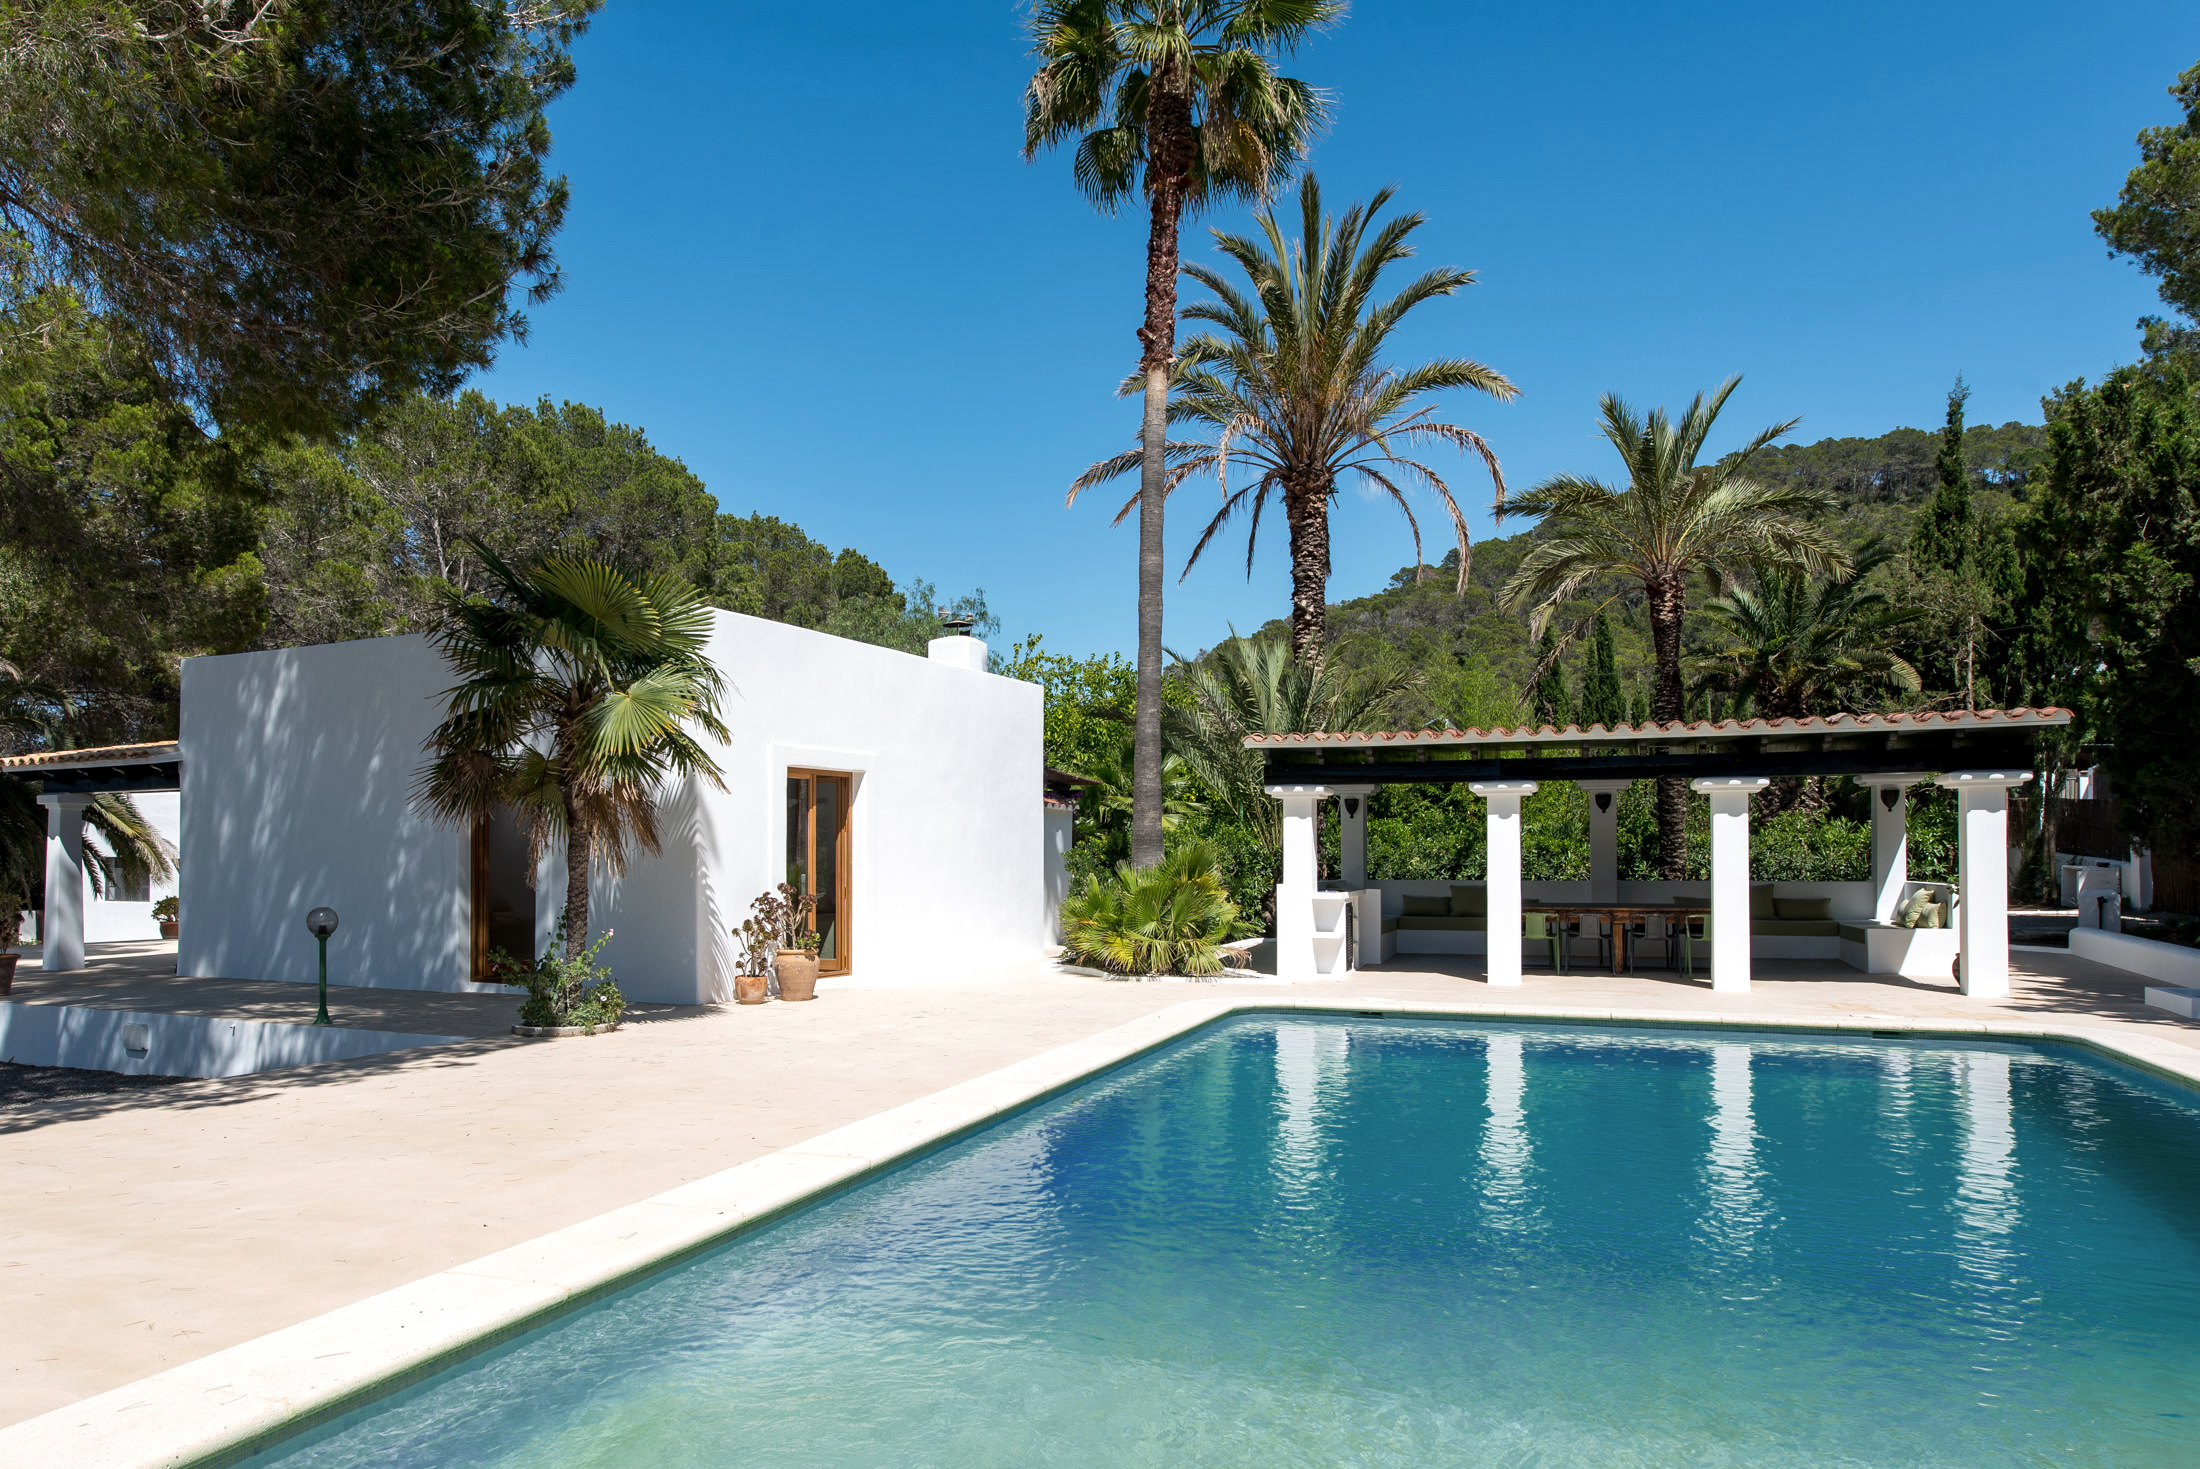 Pool and lounge area at a villa for sale in central Ibiza